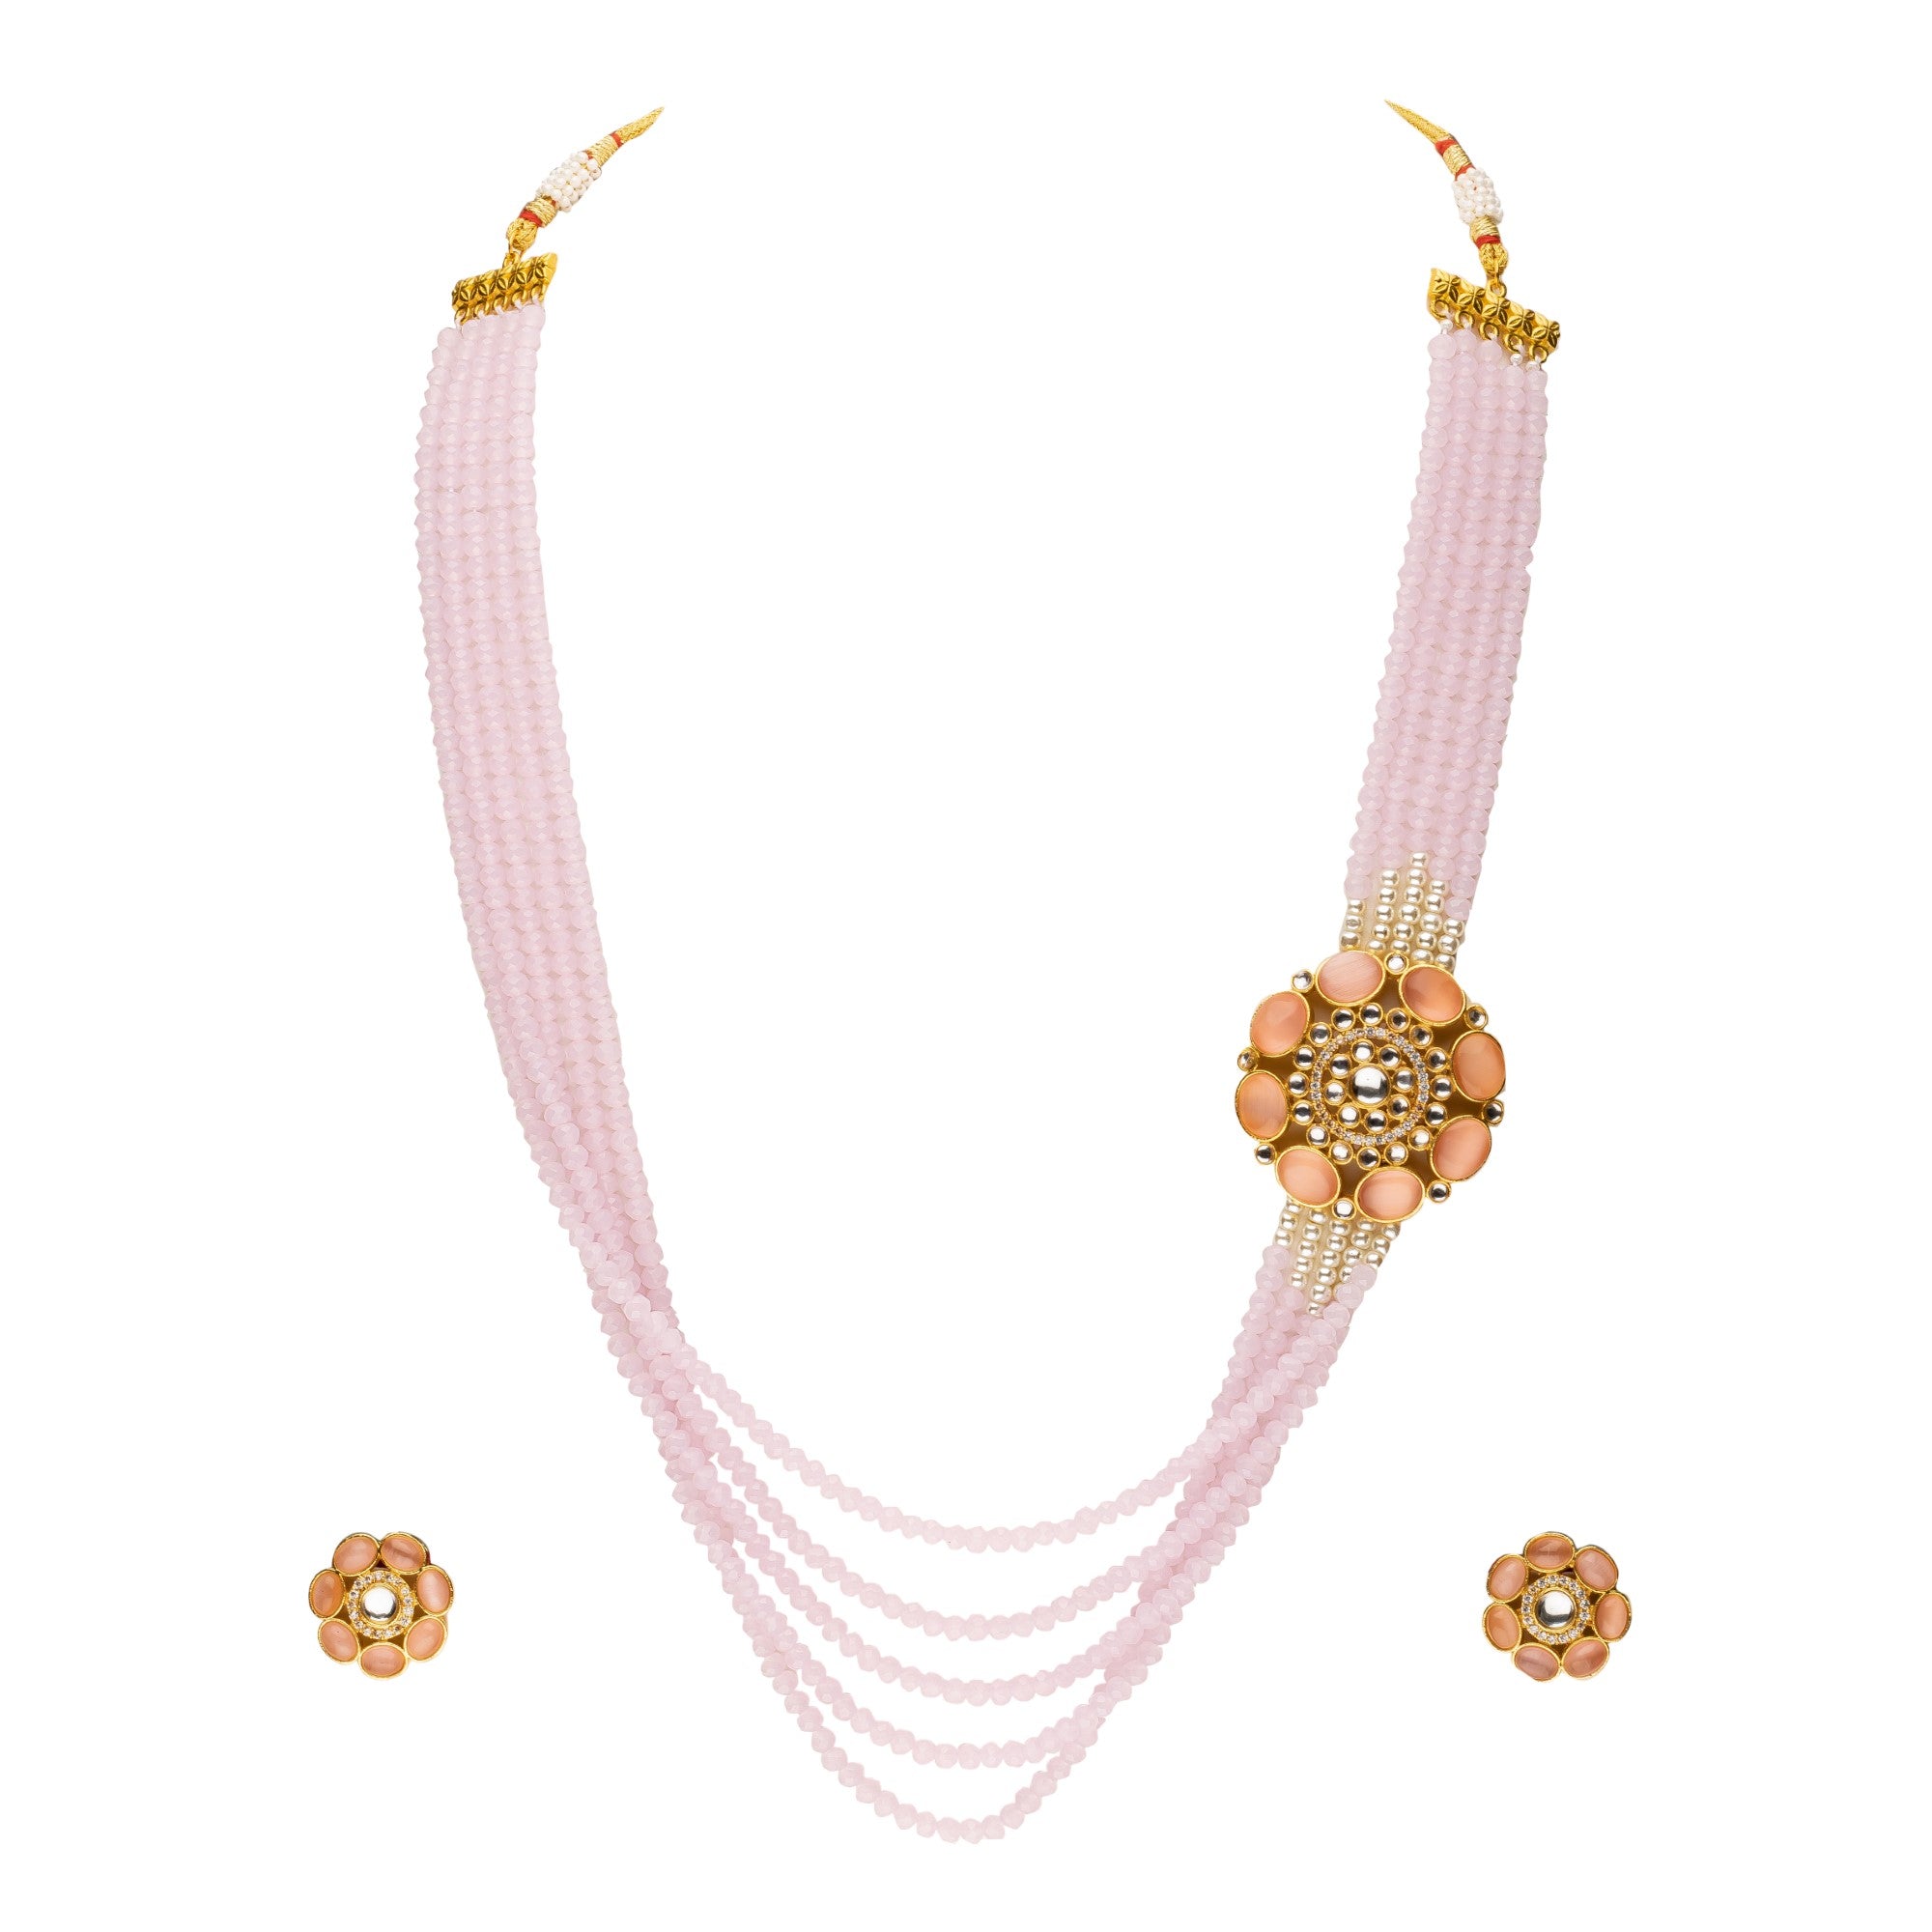 Women's Pink Brass Jewellery Sets with Adjustable Thread - Abhika Creations